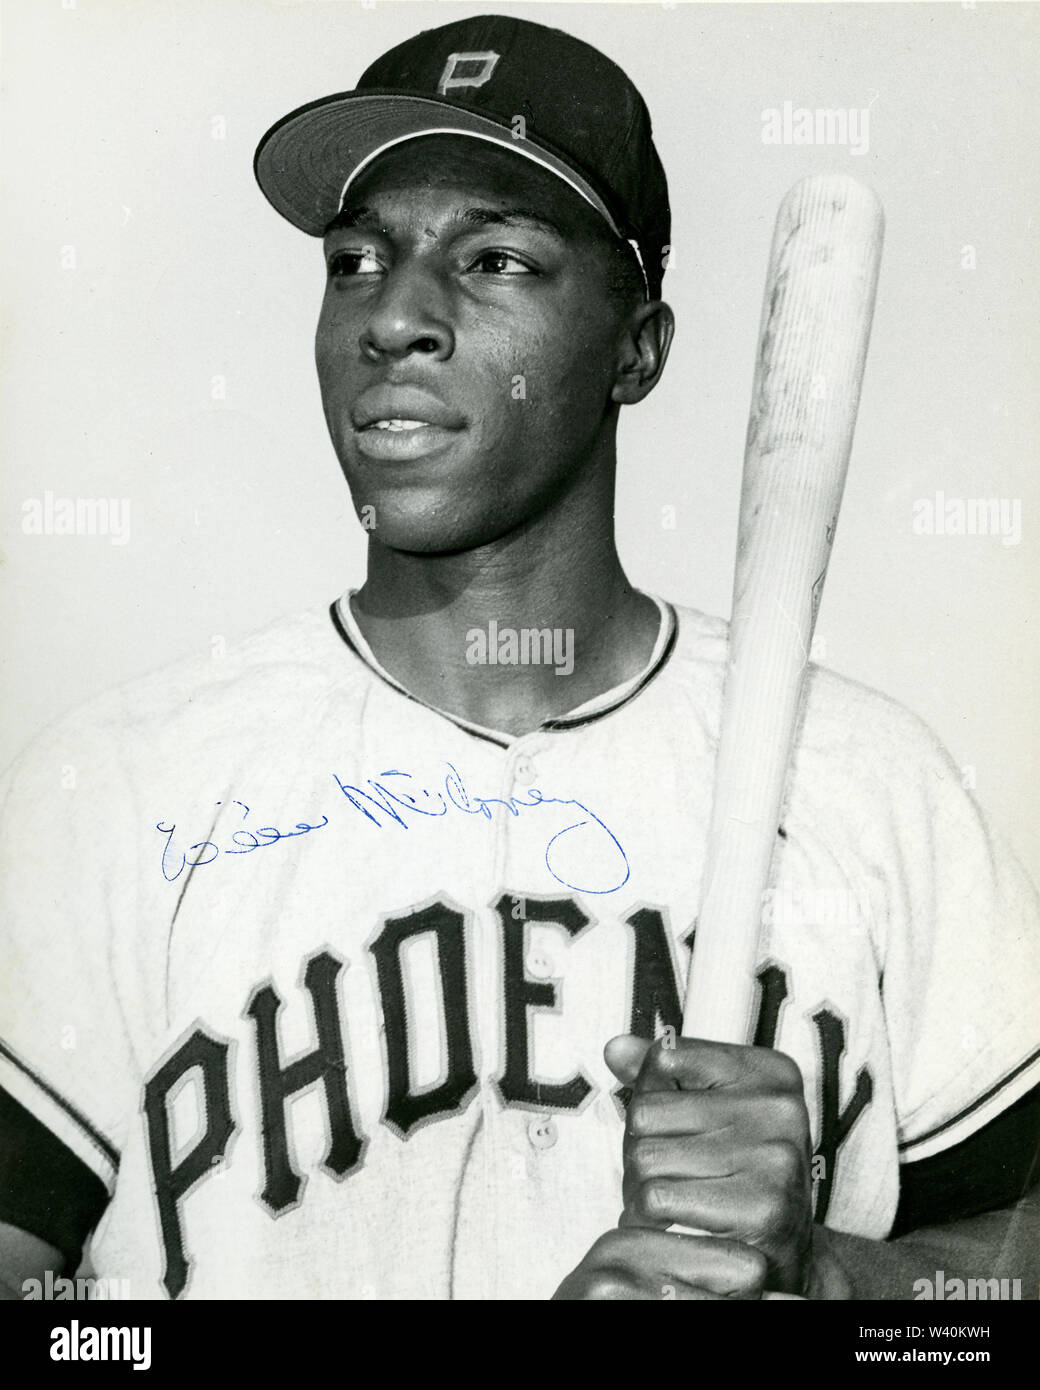 Willie McCovey as a minor league baseball player in the 1950's before he became a star hall of famer for the San Francisco Giants in the 1960.s and 70's. Stock Photo